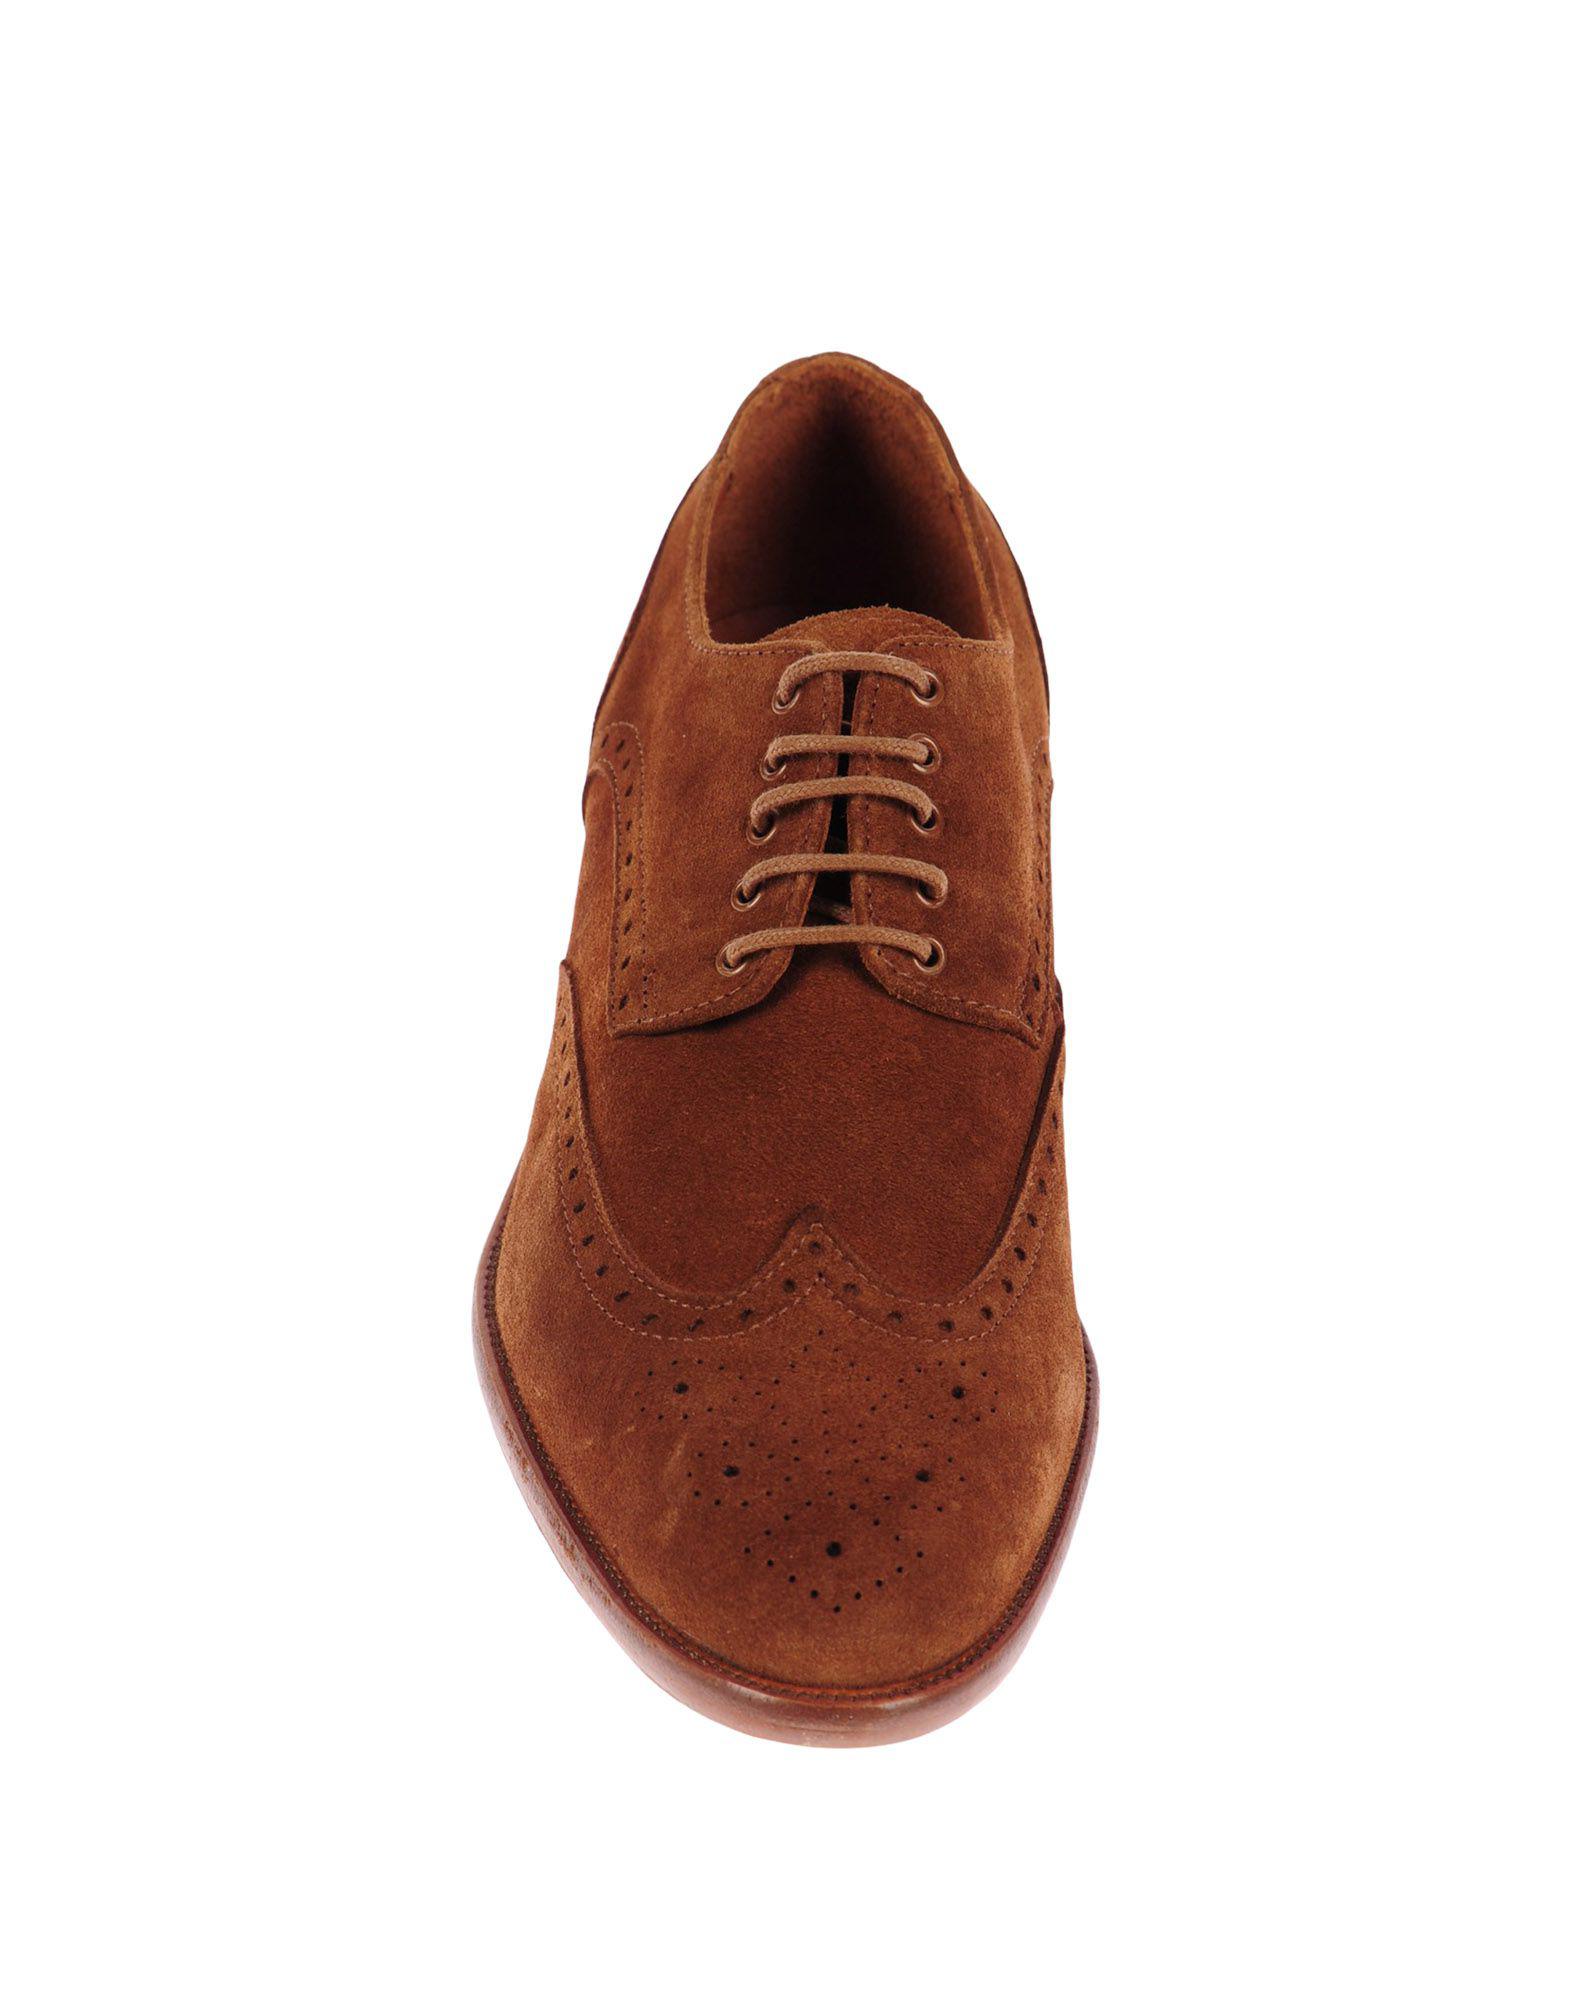 Baldessarini Suede Lace-up Shoes in Brown for Men - Lyst